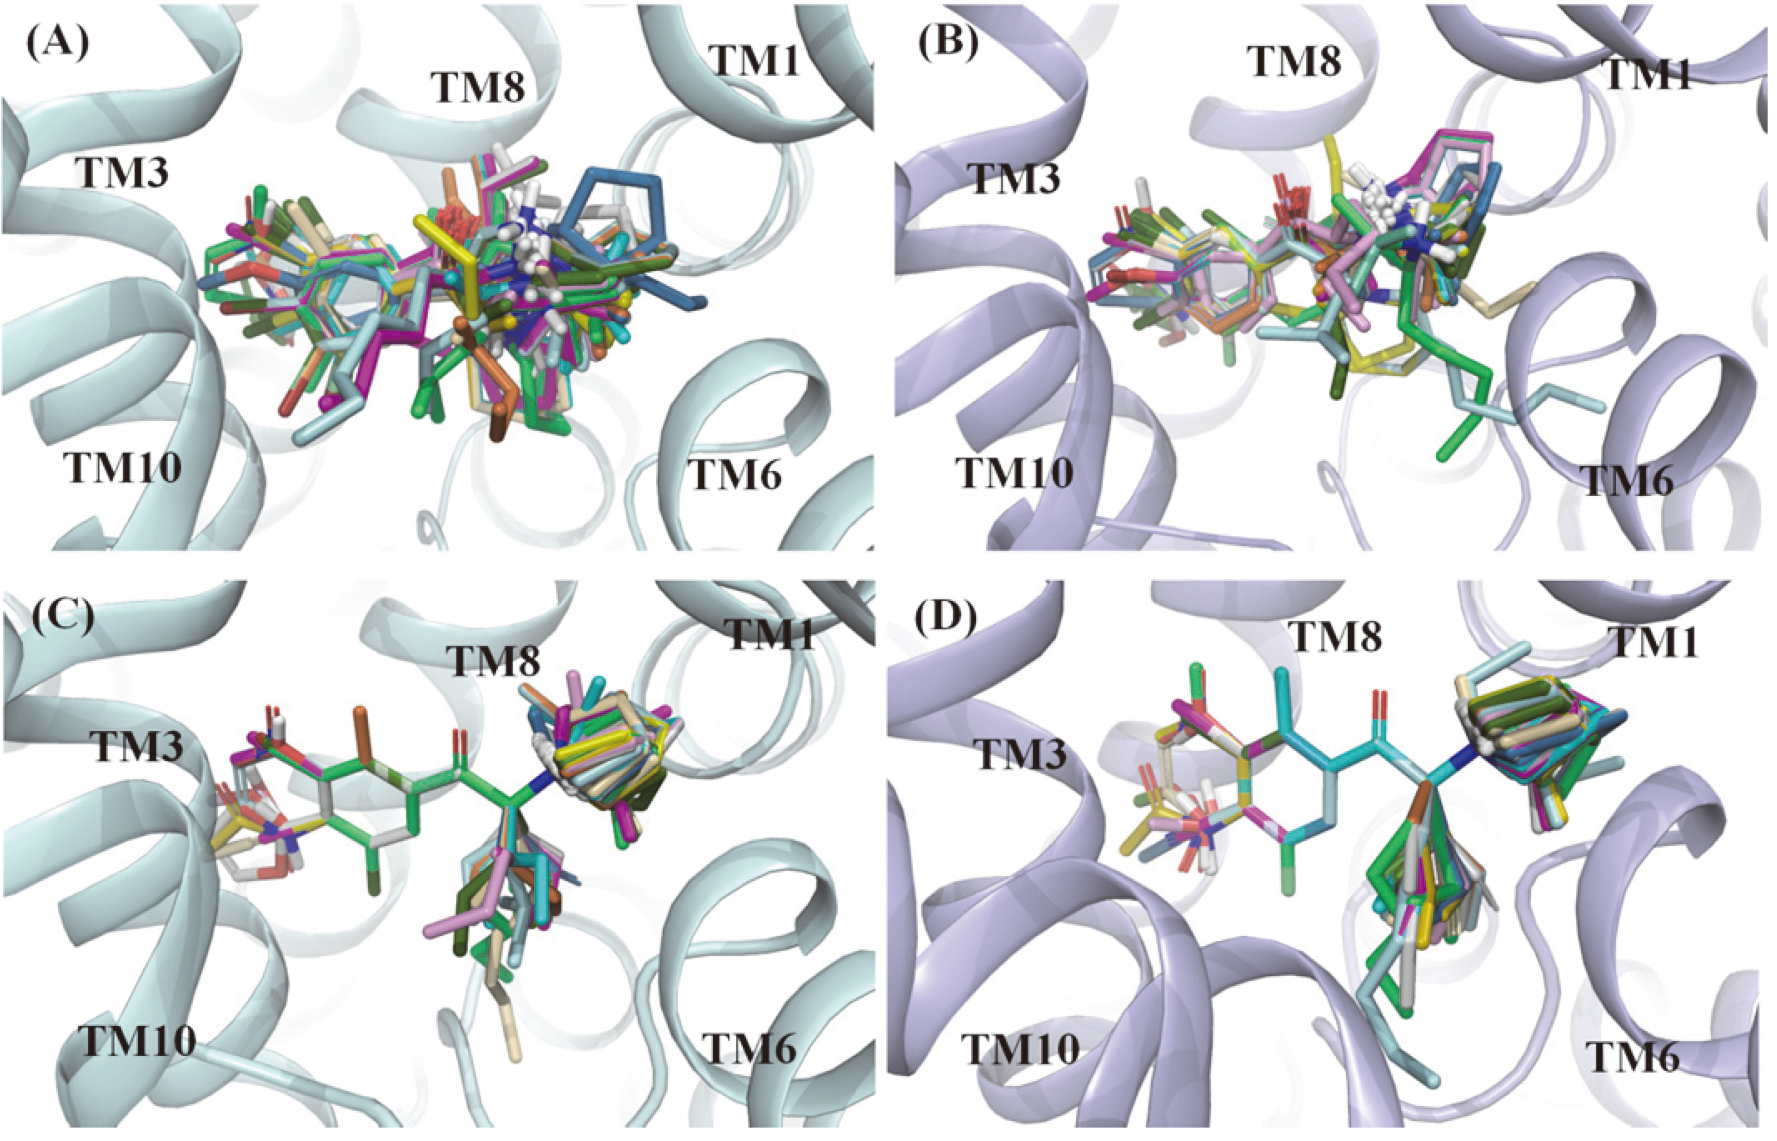 Docking poses (A and B) and superimposed poses (C and D) template as bupropion of NDRIs compounds in the binding pocket of hNET and hDAT. The hNET (palecyan) and hDAT (lightblue) were shown in ribbon representation.